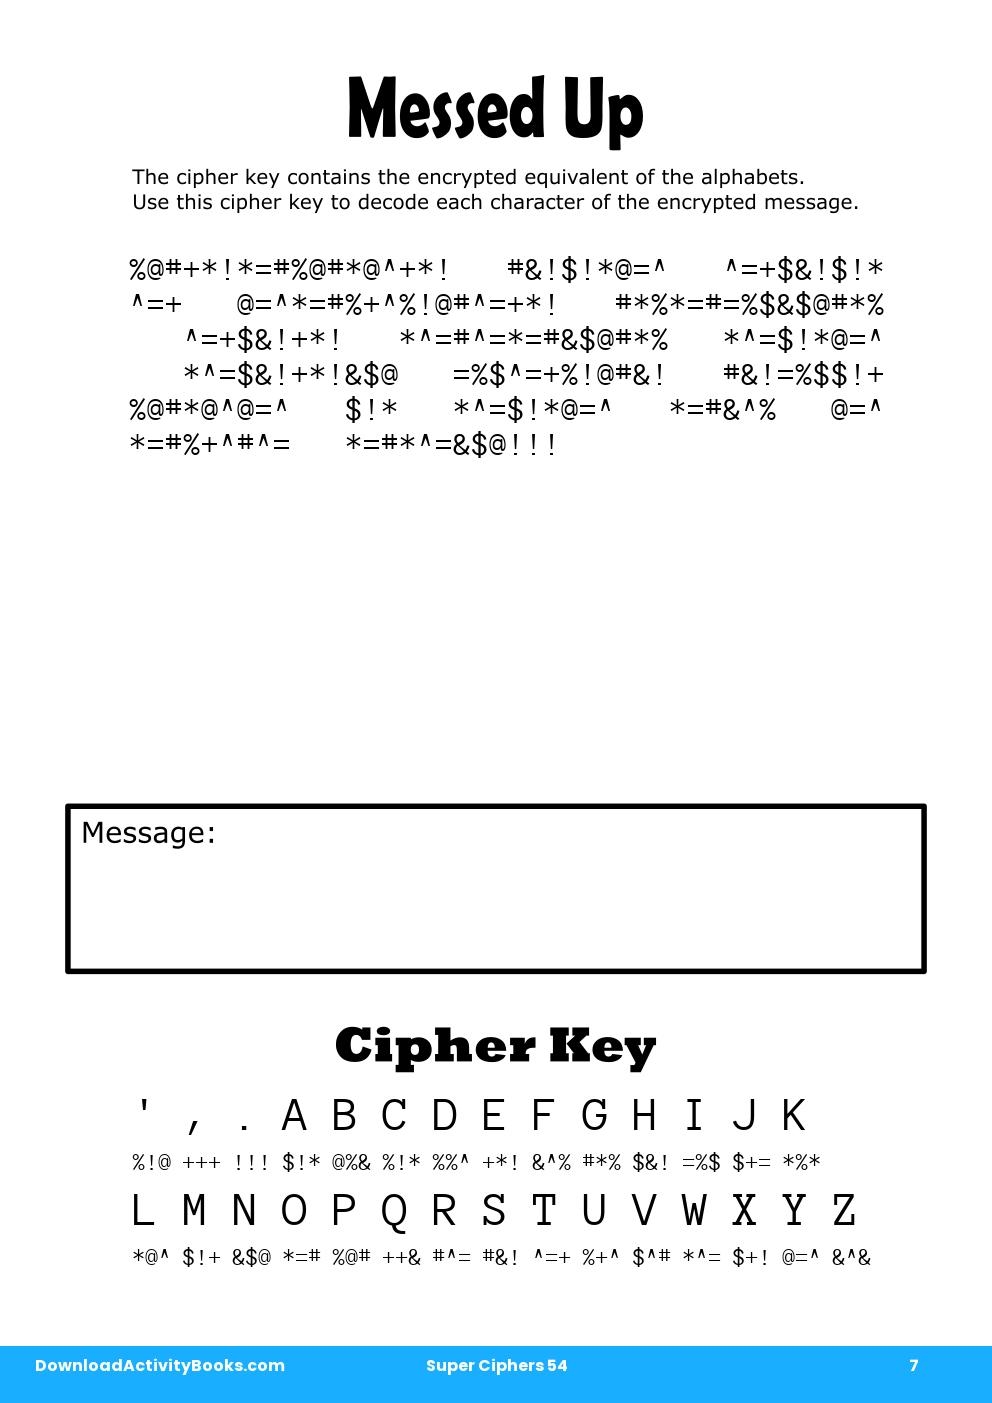 Messed Up in Super Ciphers 54